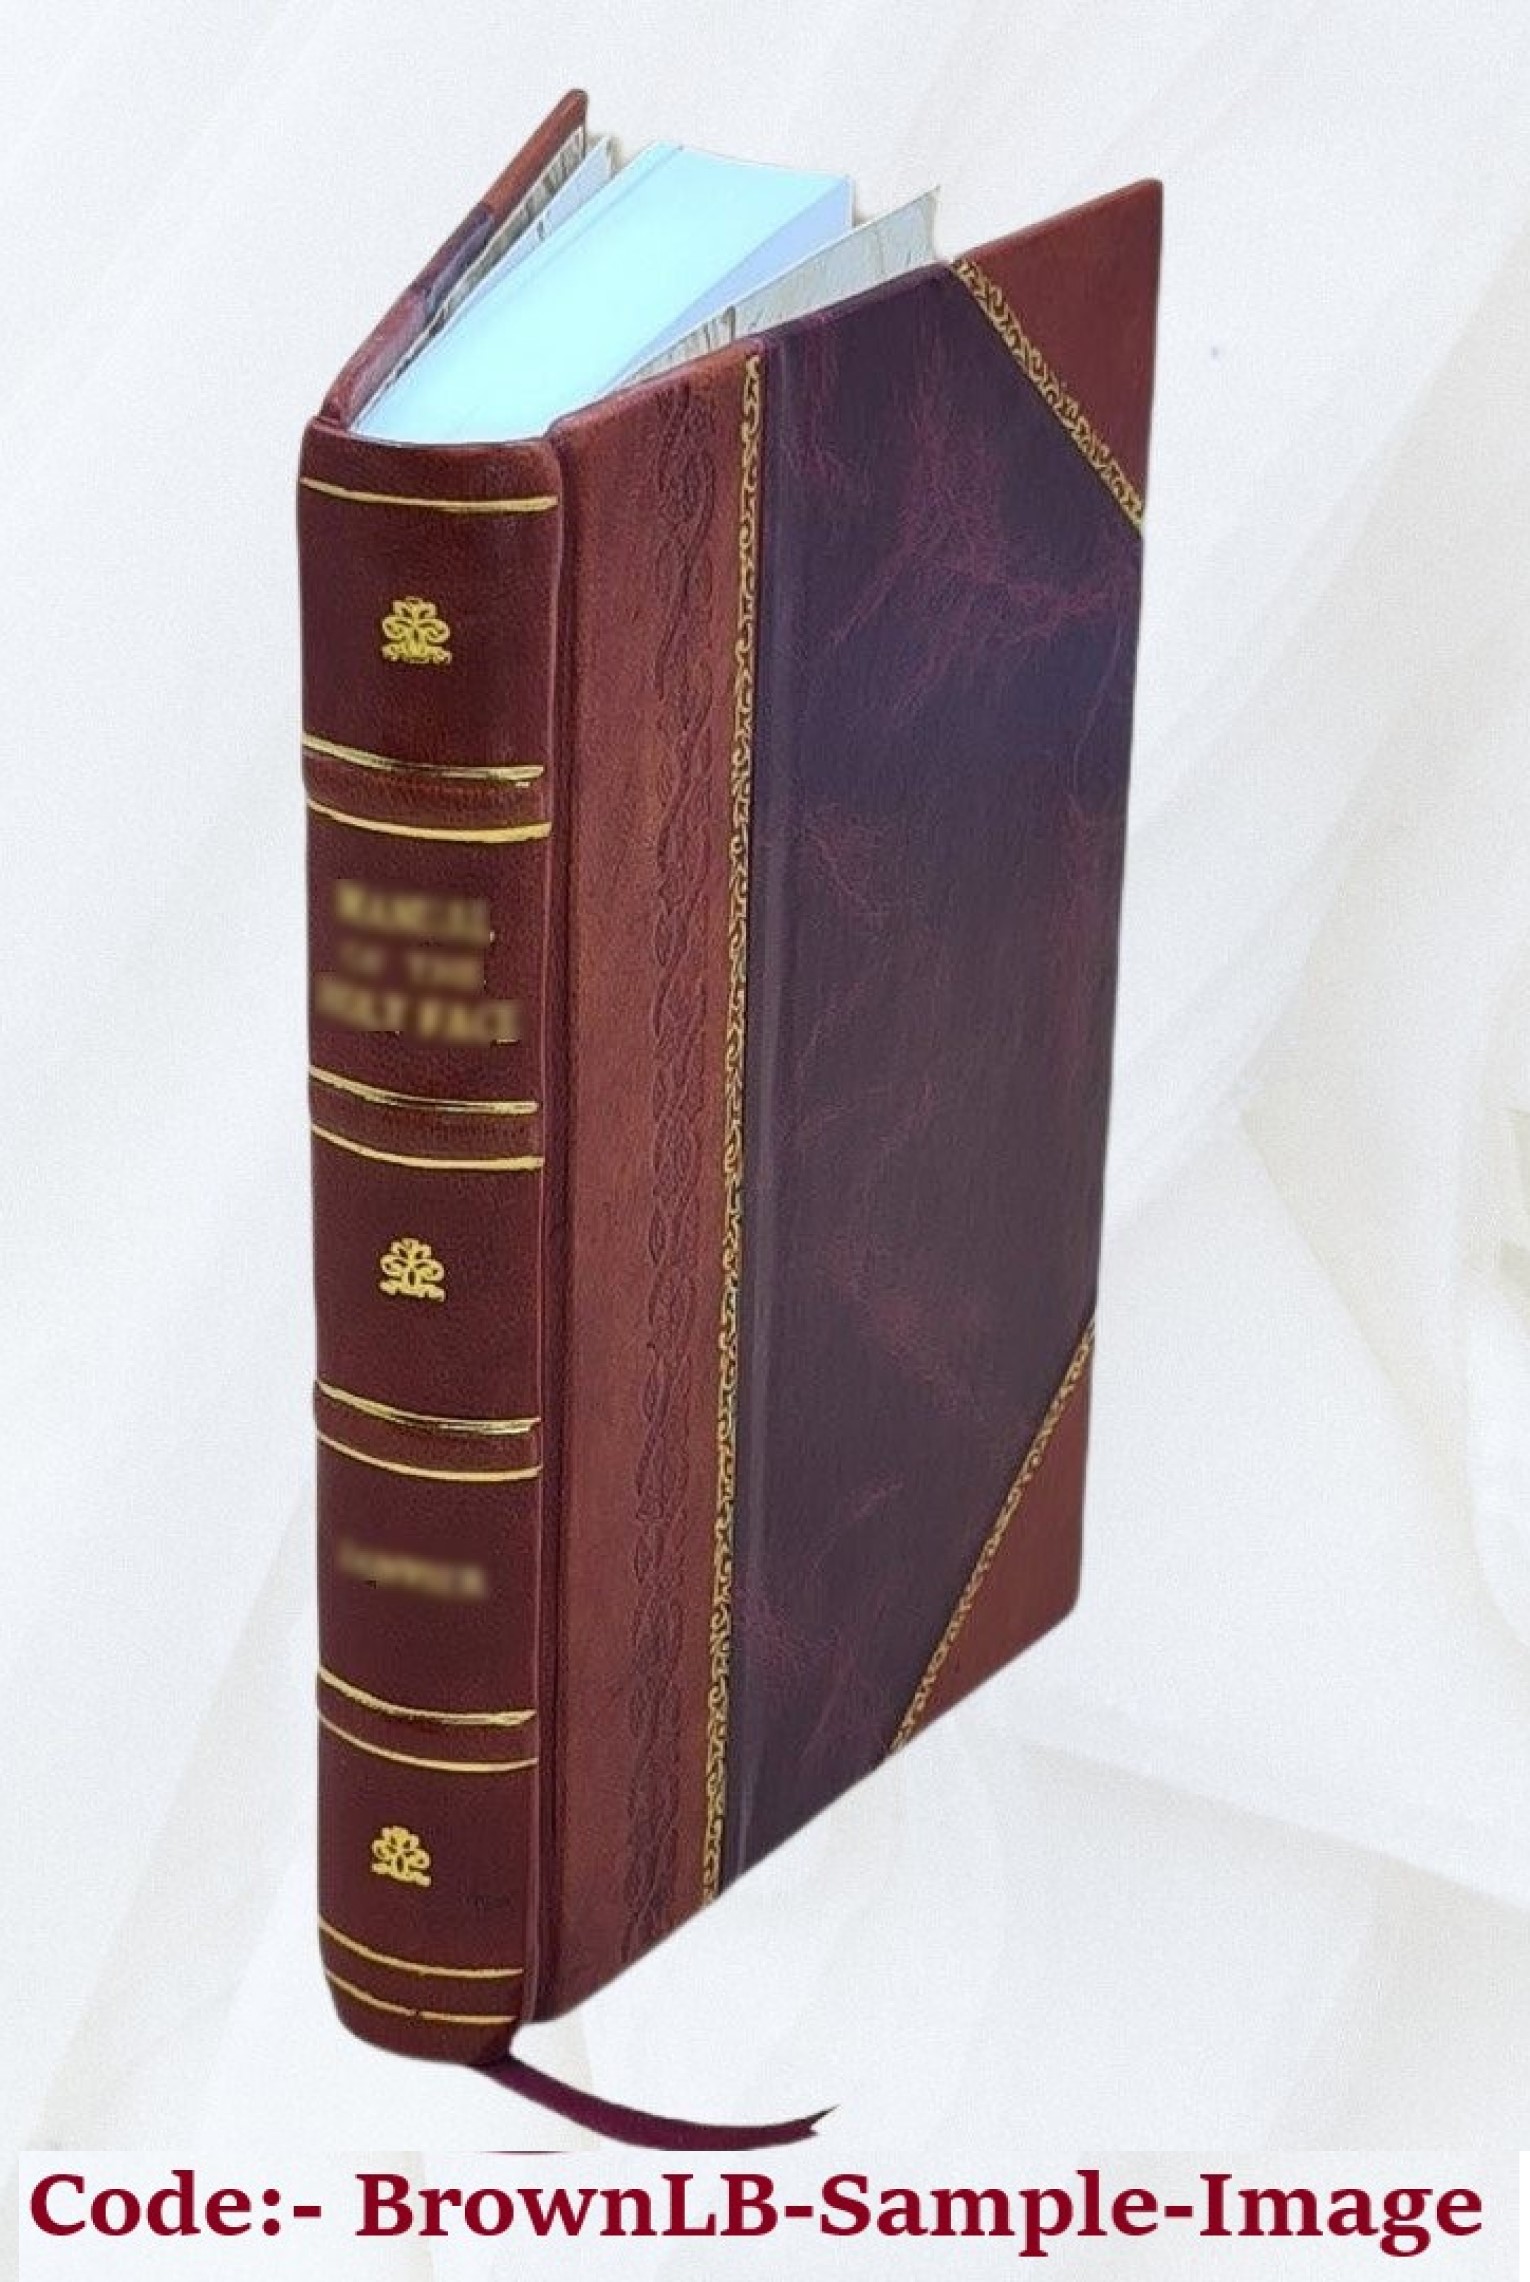 The Life Of Lord Curzon Vol-III 1928 [Leather Bound] - image 1 of 5